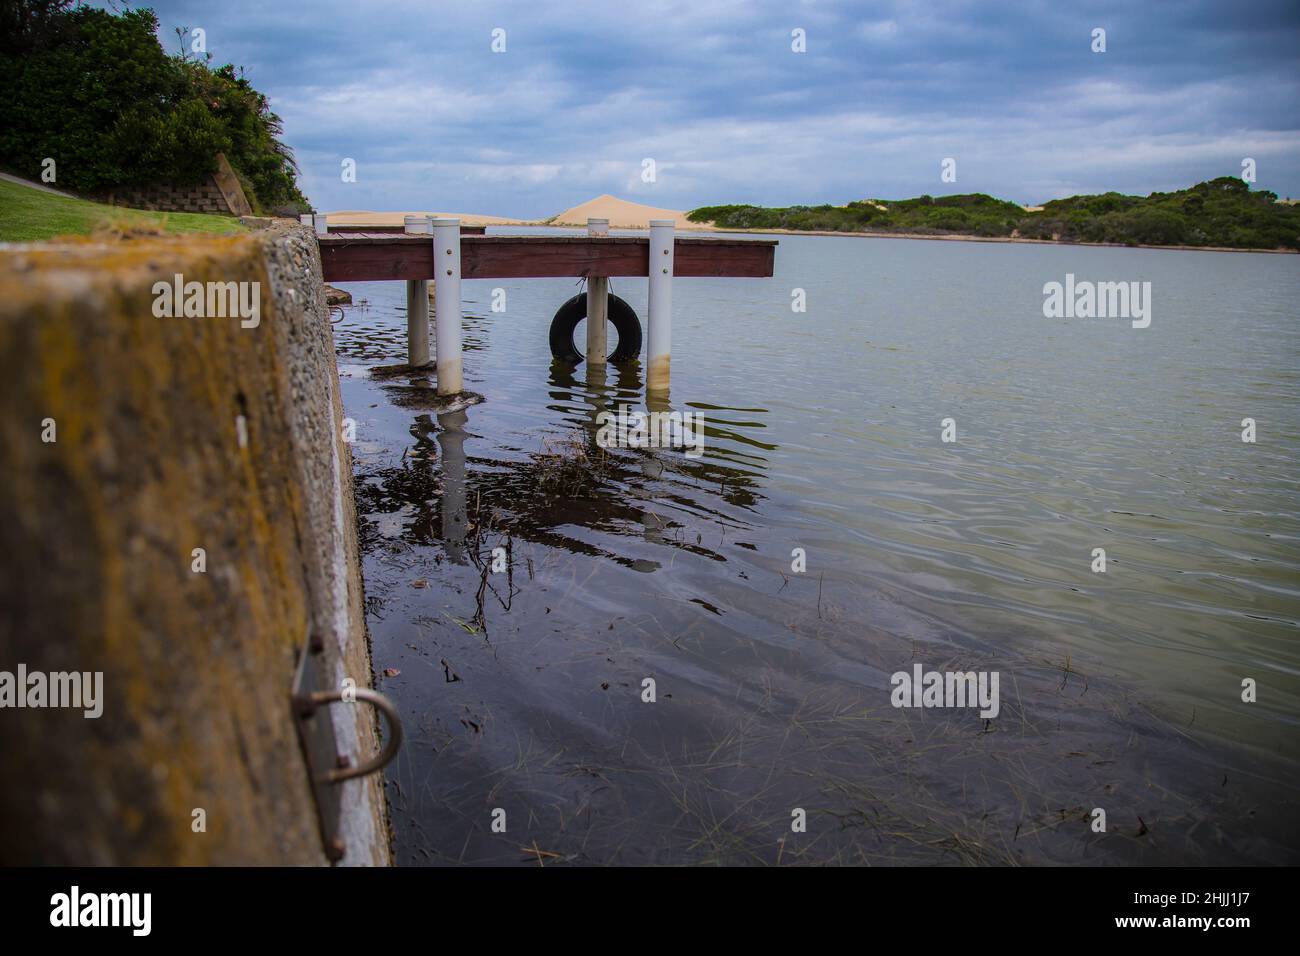 Docking Jetty on a quiet and still river. Stock Photo